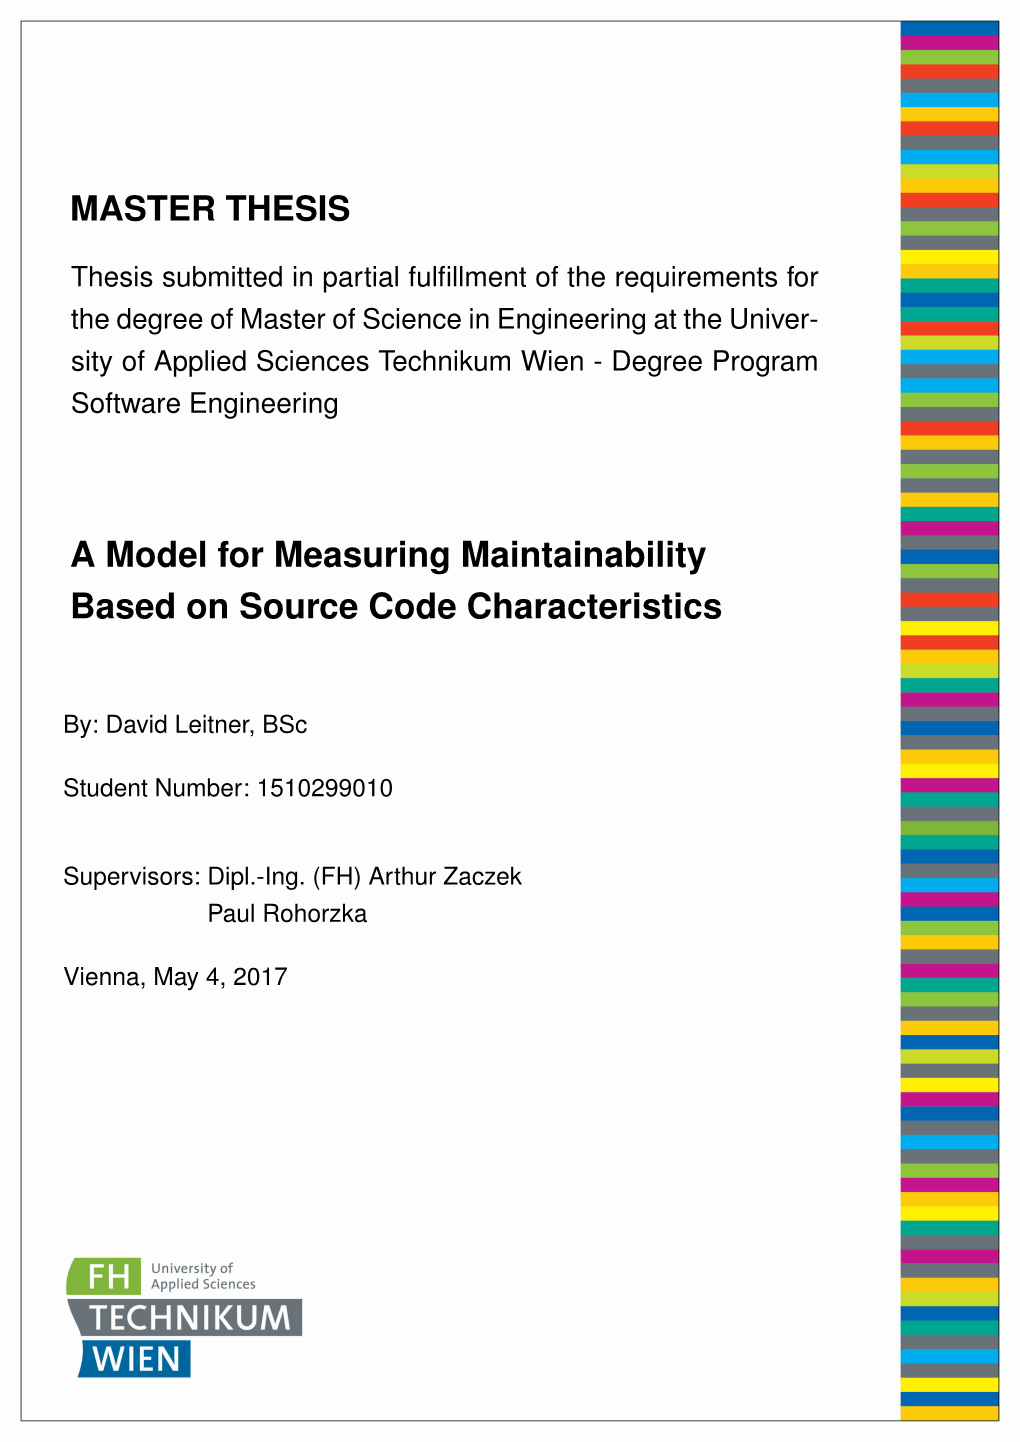 MASTER THESIS a Model for Measuring Maintainability Based On